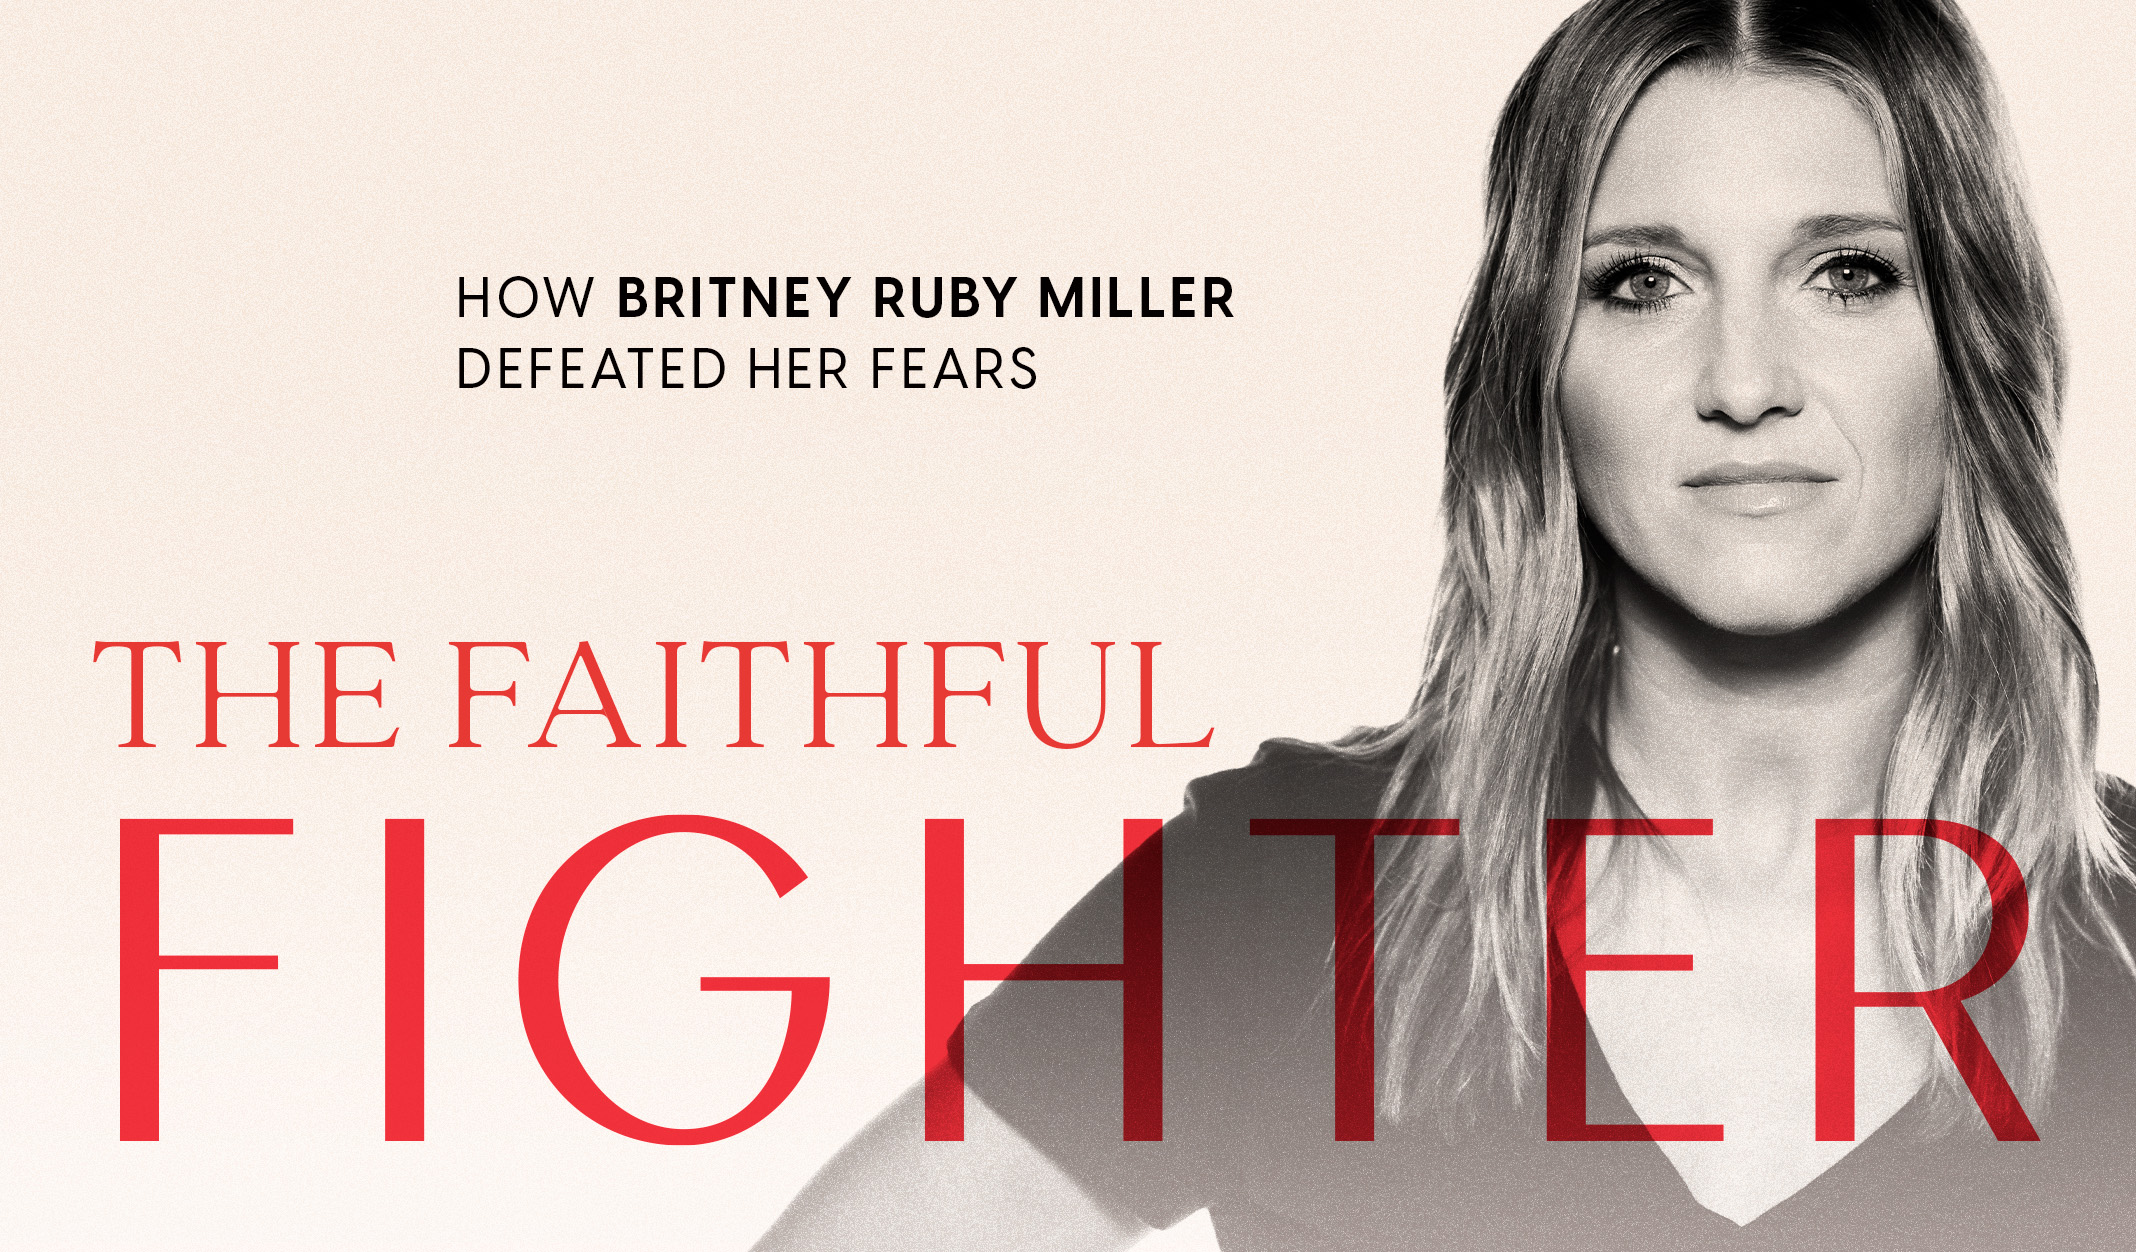 The Faithful Fighter: How Britney Ruby Miller defeated her fears.